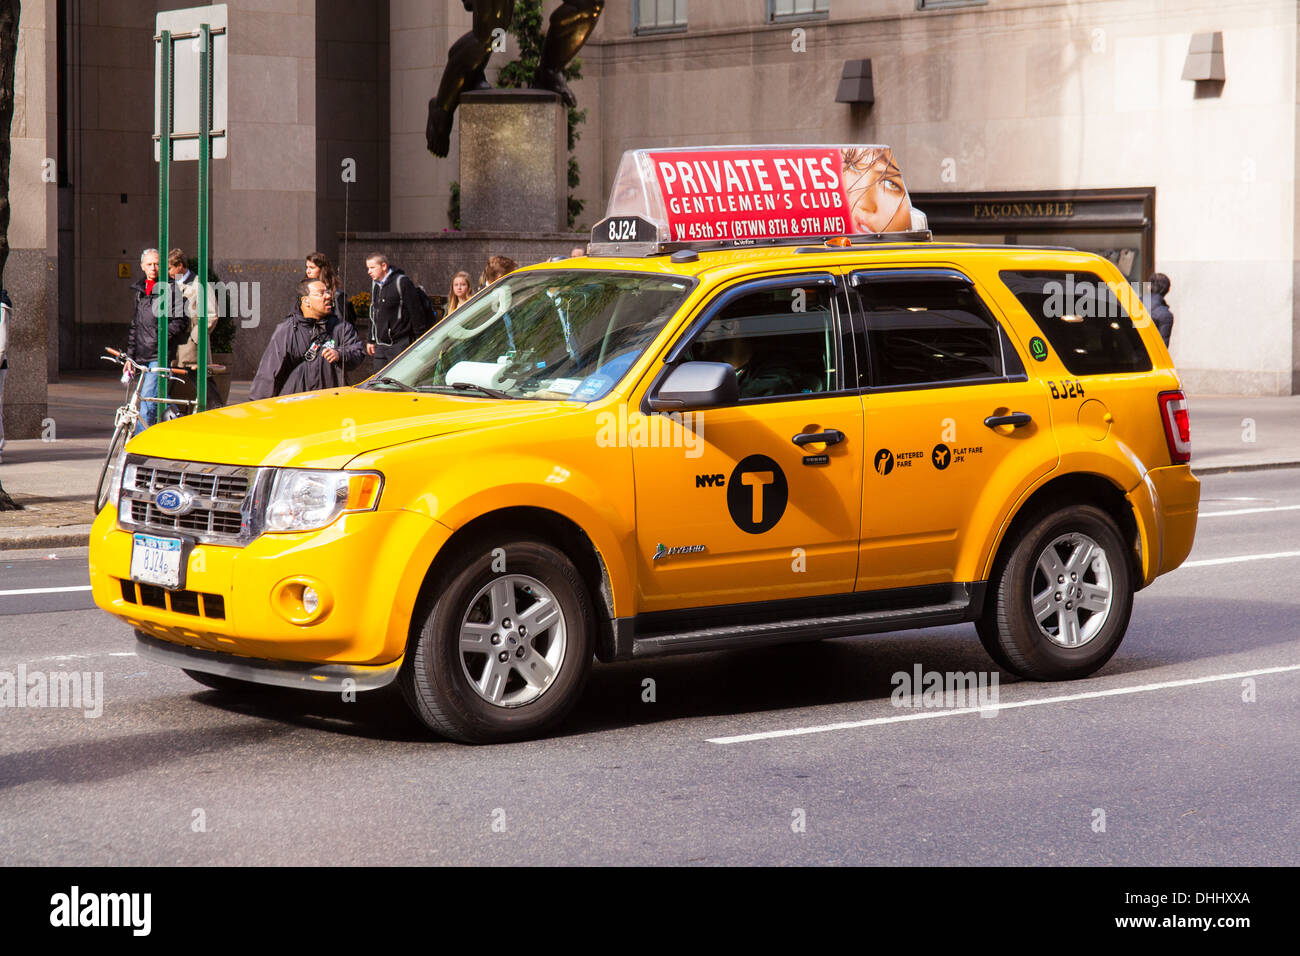 Yellow taxi cabs, Fifth Avenue, New York City, United States of America. Stock Photo